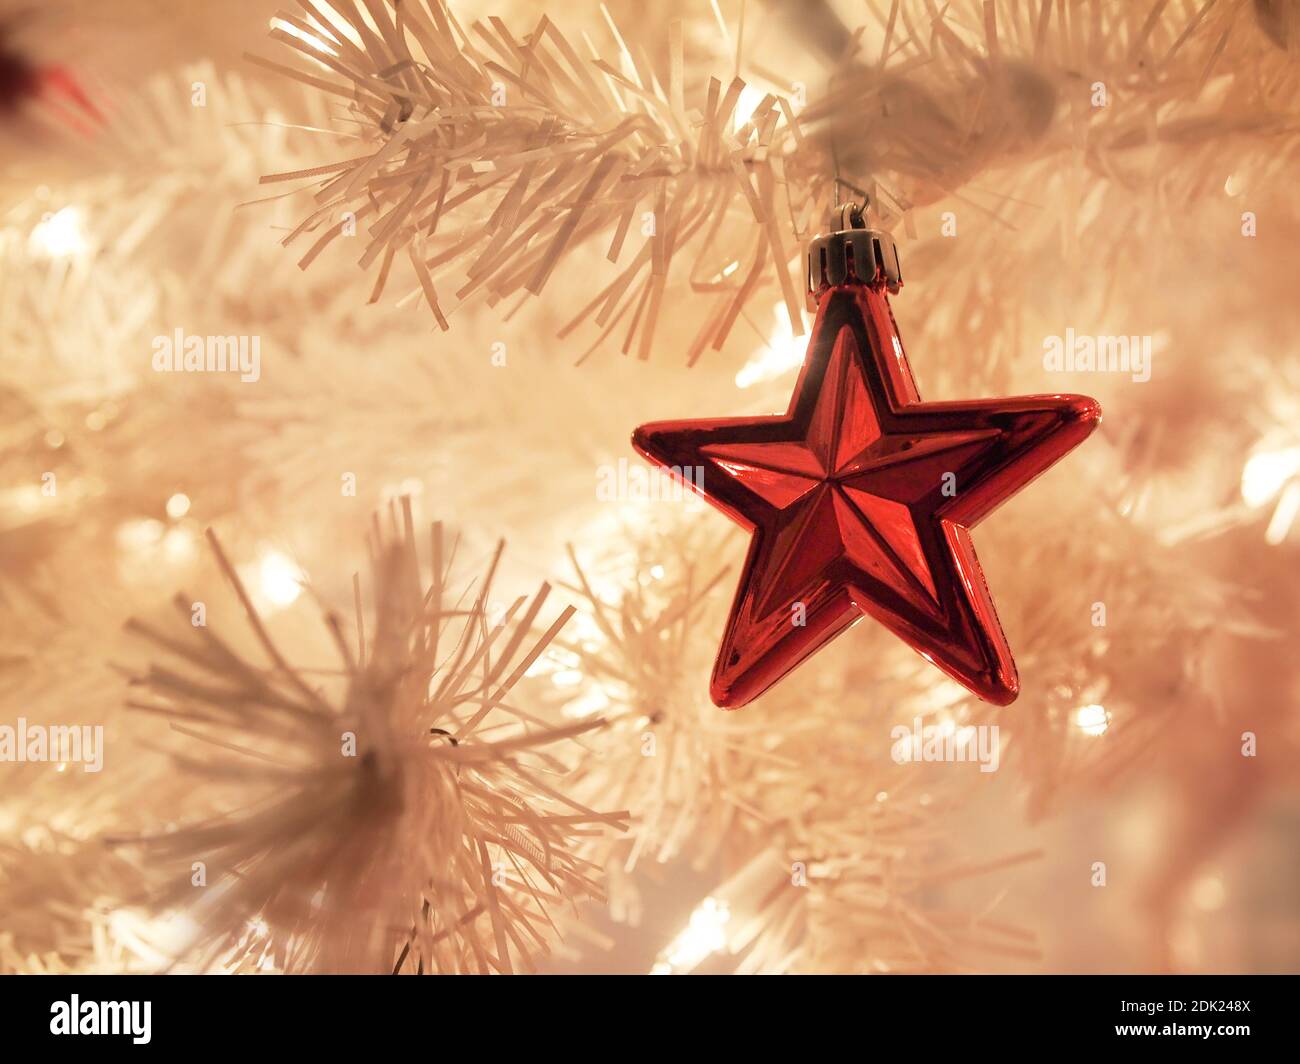 A shiny red star shaped ornament hangs in a white Christmas tree with bokeh and white twinkle lights during the holiday season. Stock Photo